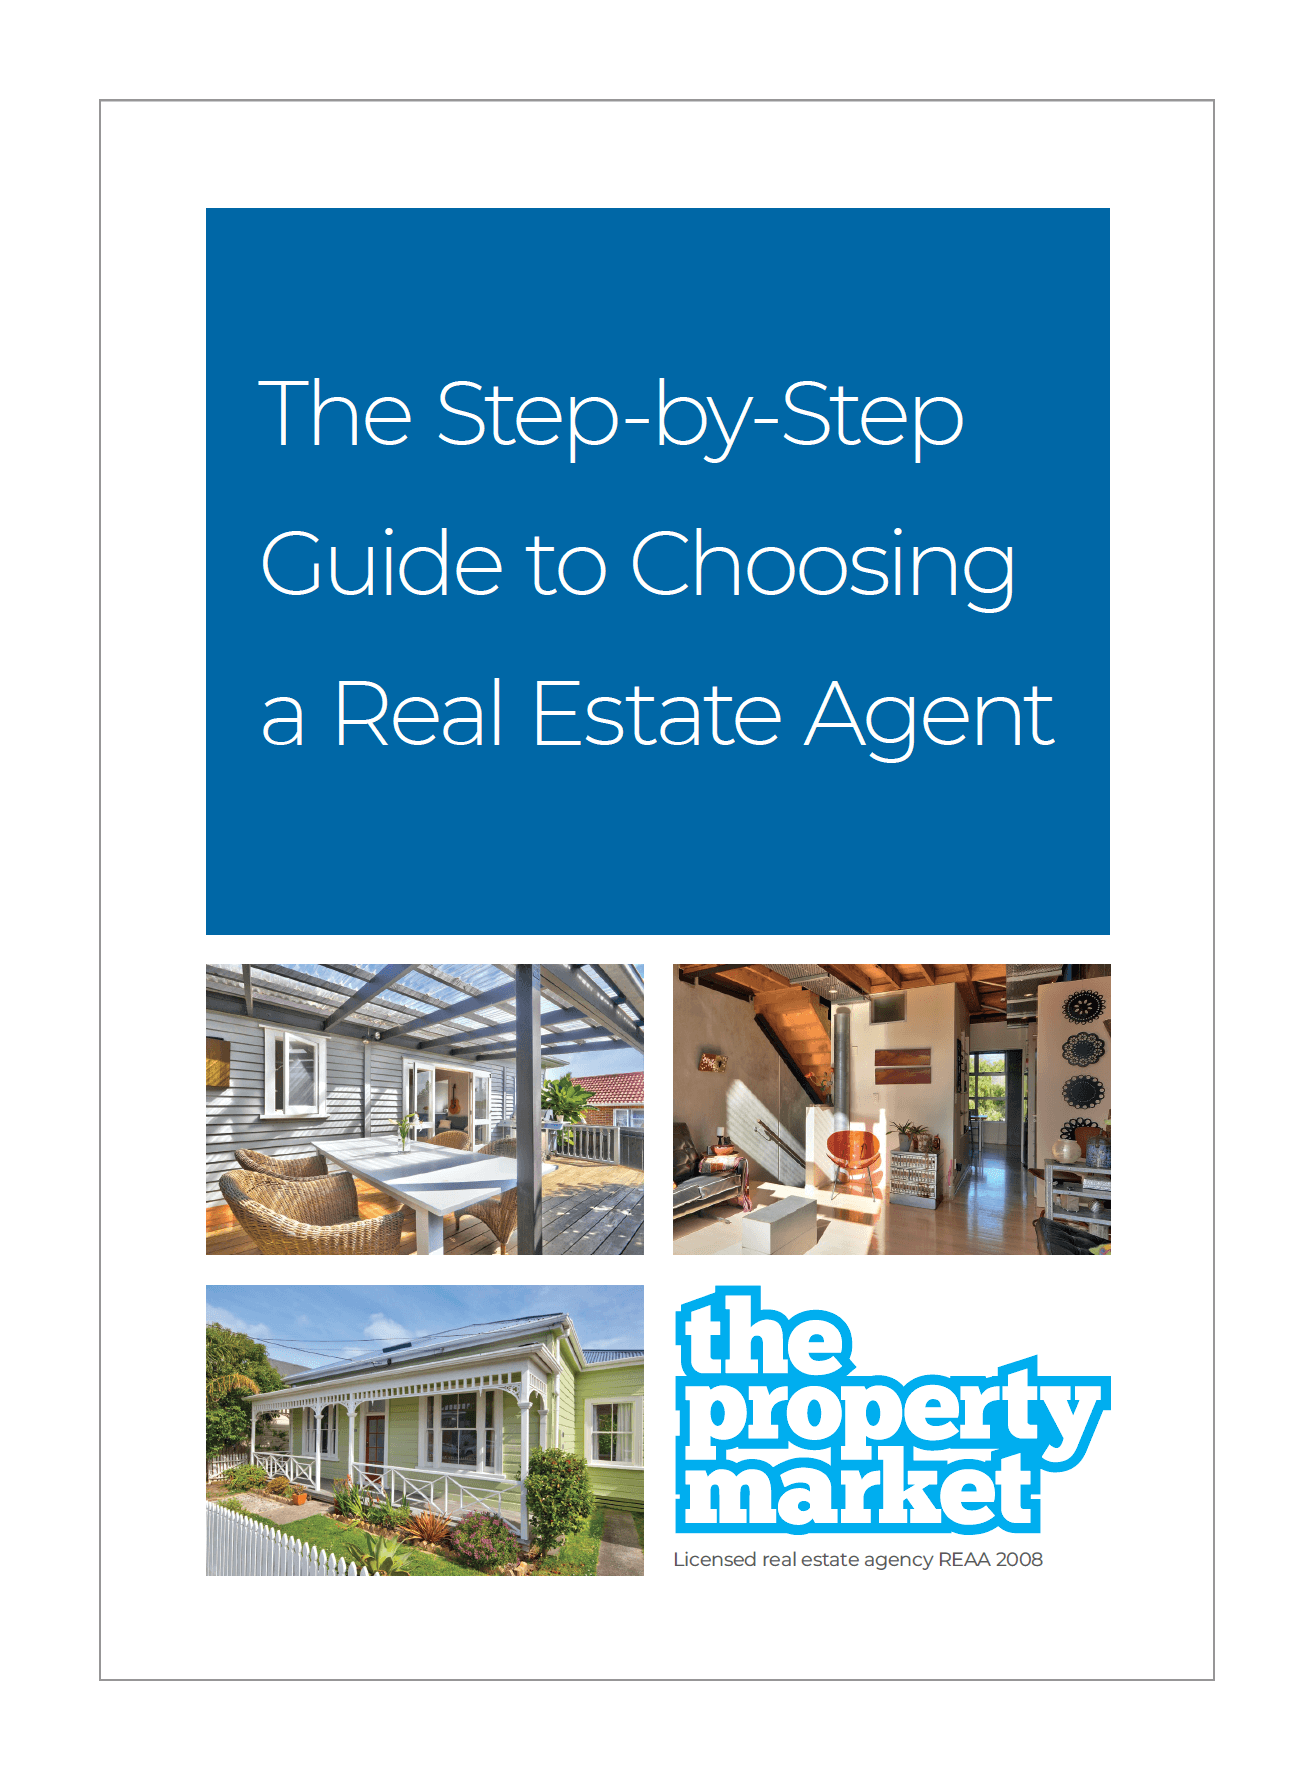 Choose the best real estate agent for your home. Download our free guide to find out how.